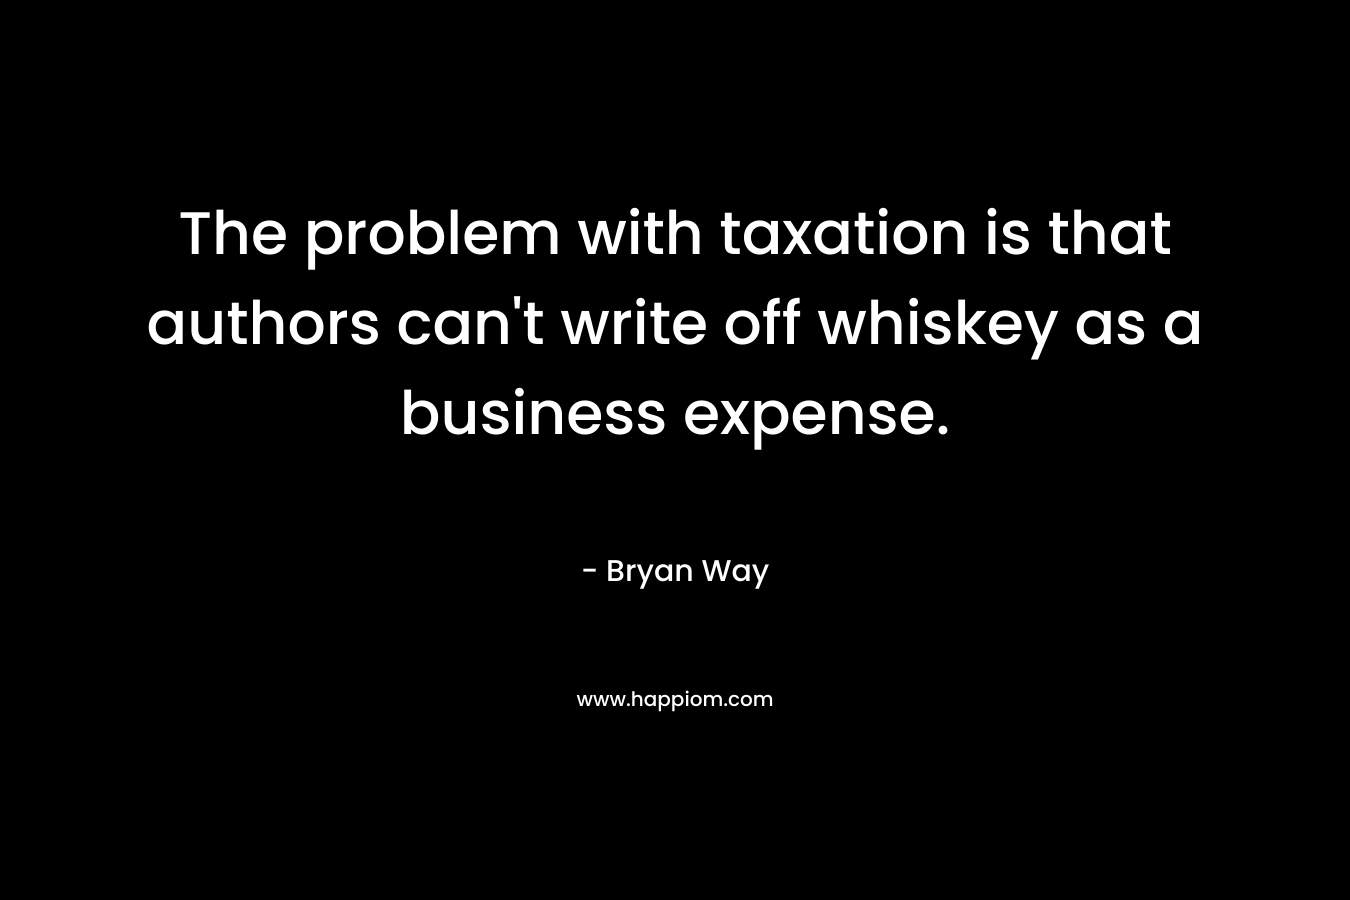 The problem with taxation is that authors can’t write off whiskey as a business expense. – Bryan Way